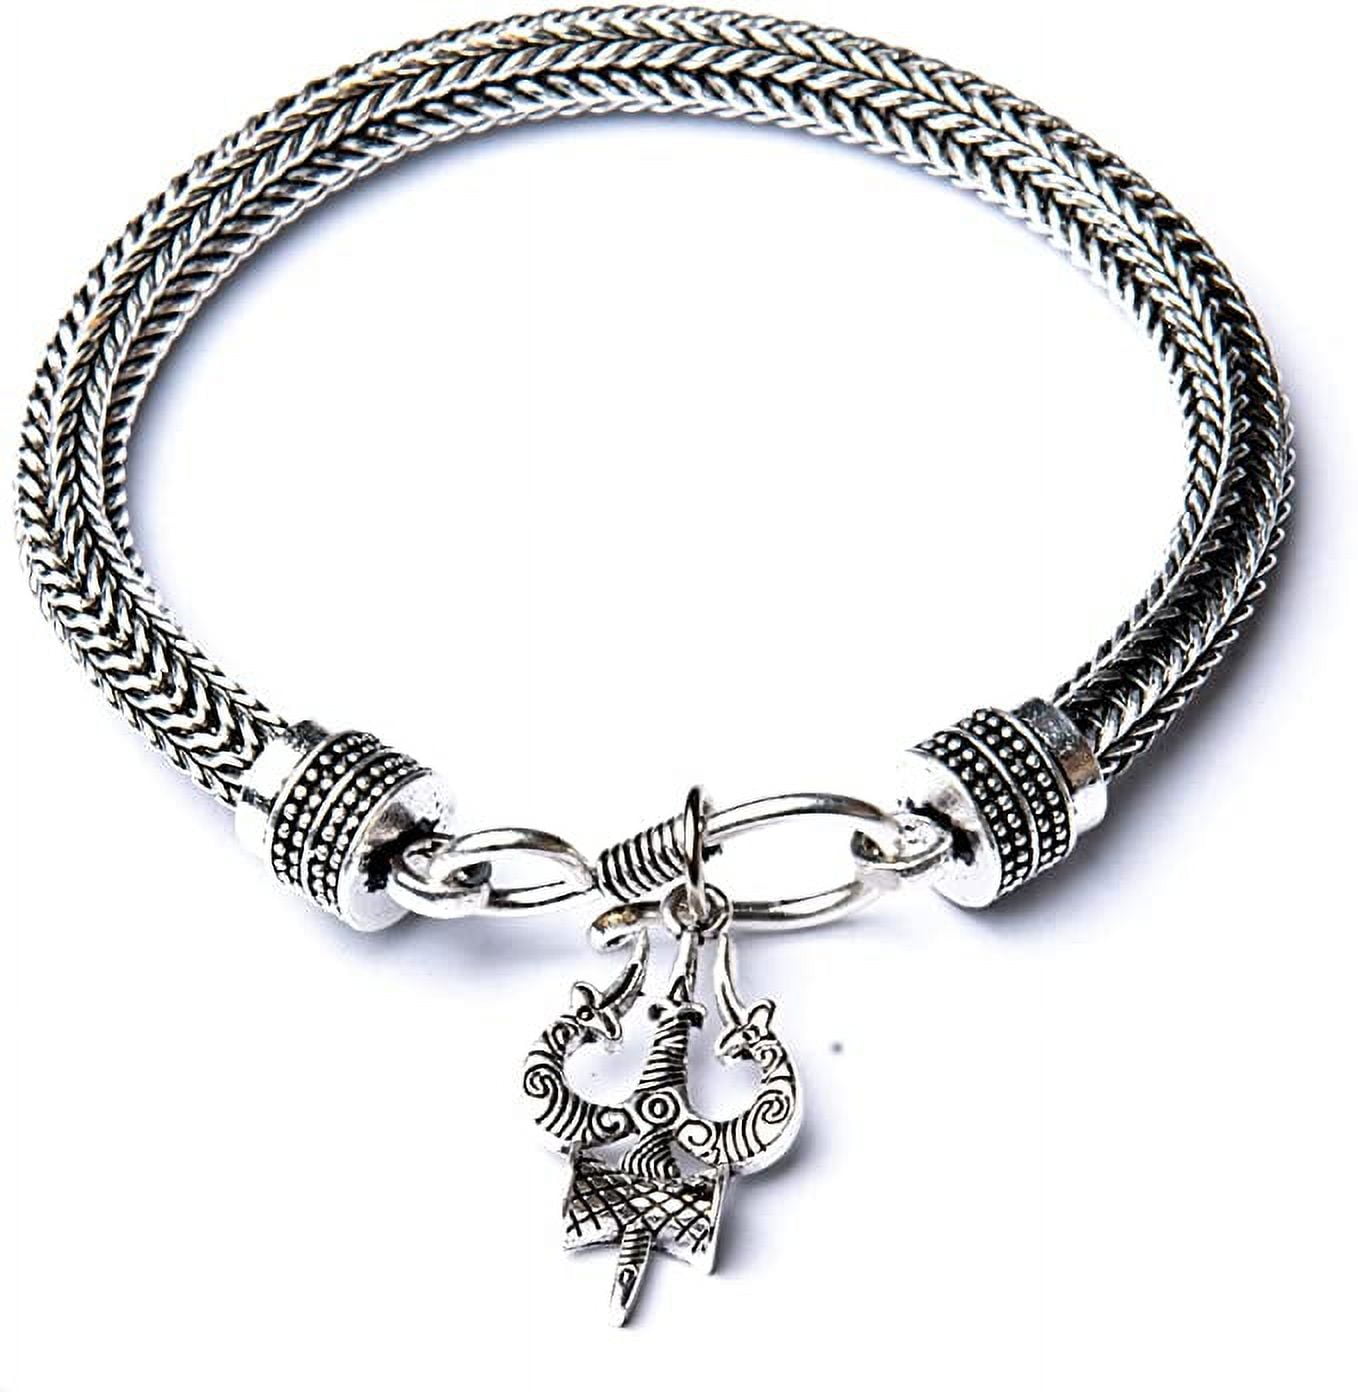 Lord Shiva Silver Bracelet Manufacturer Supplier from Hooghly India